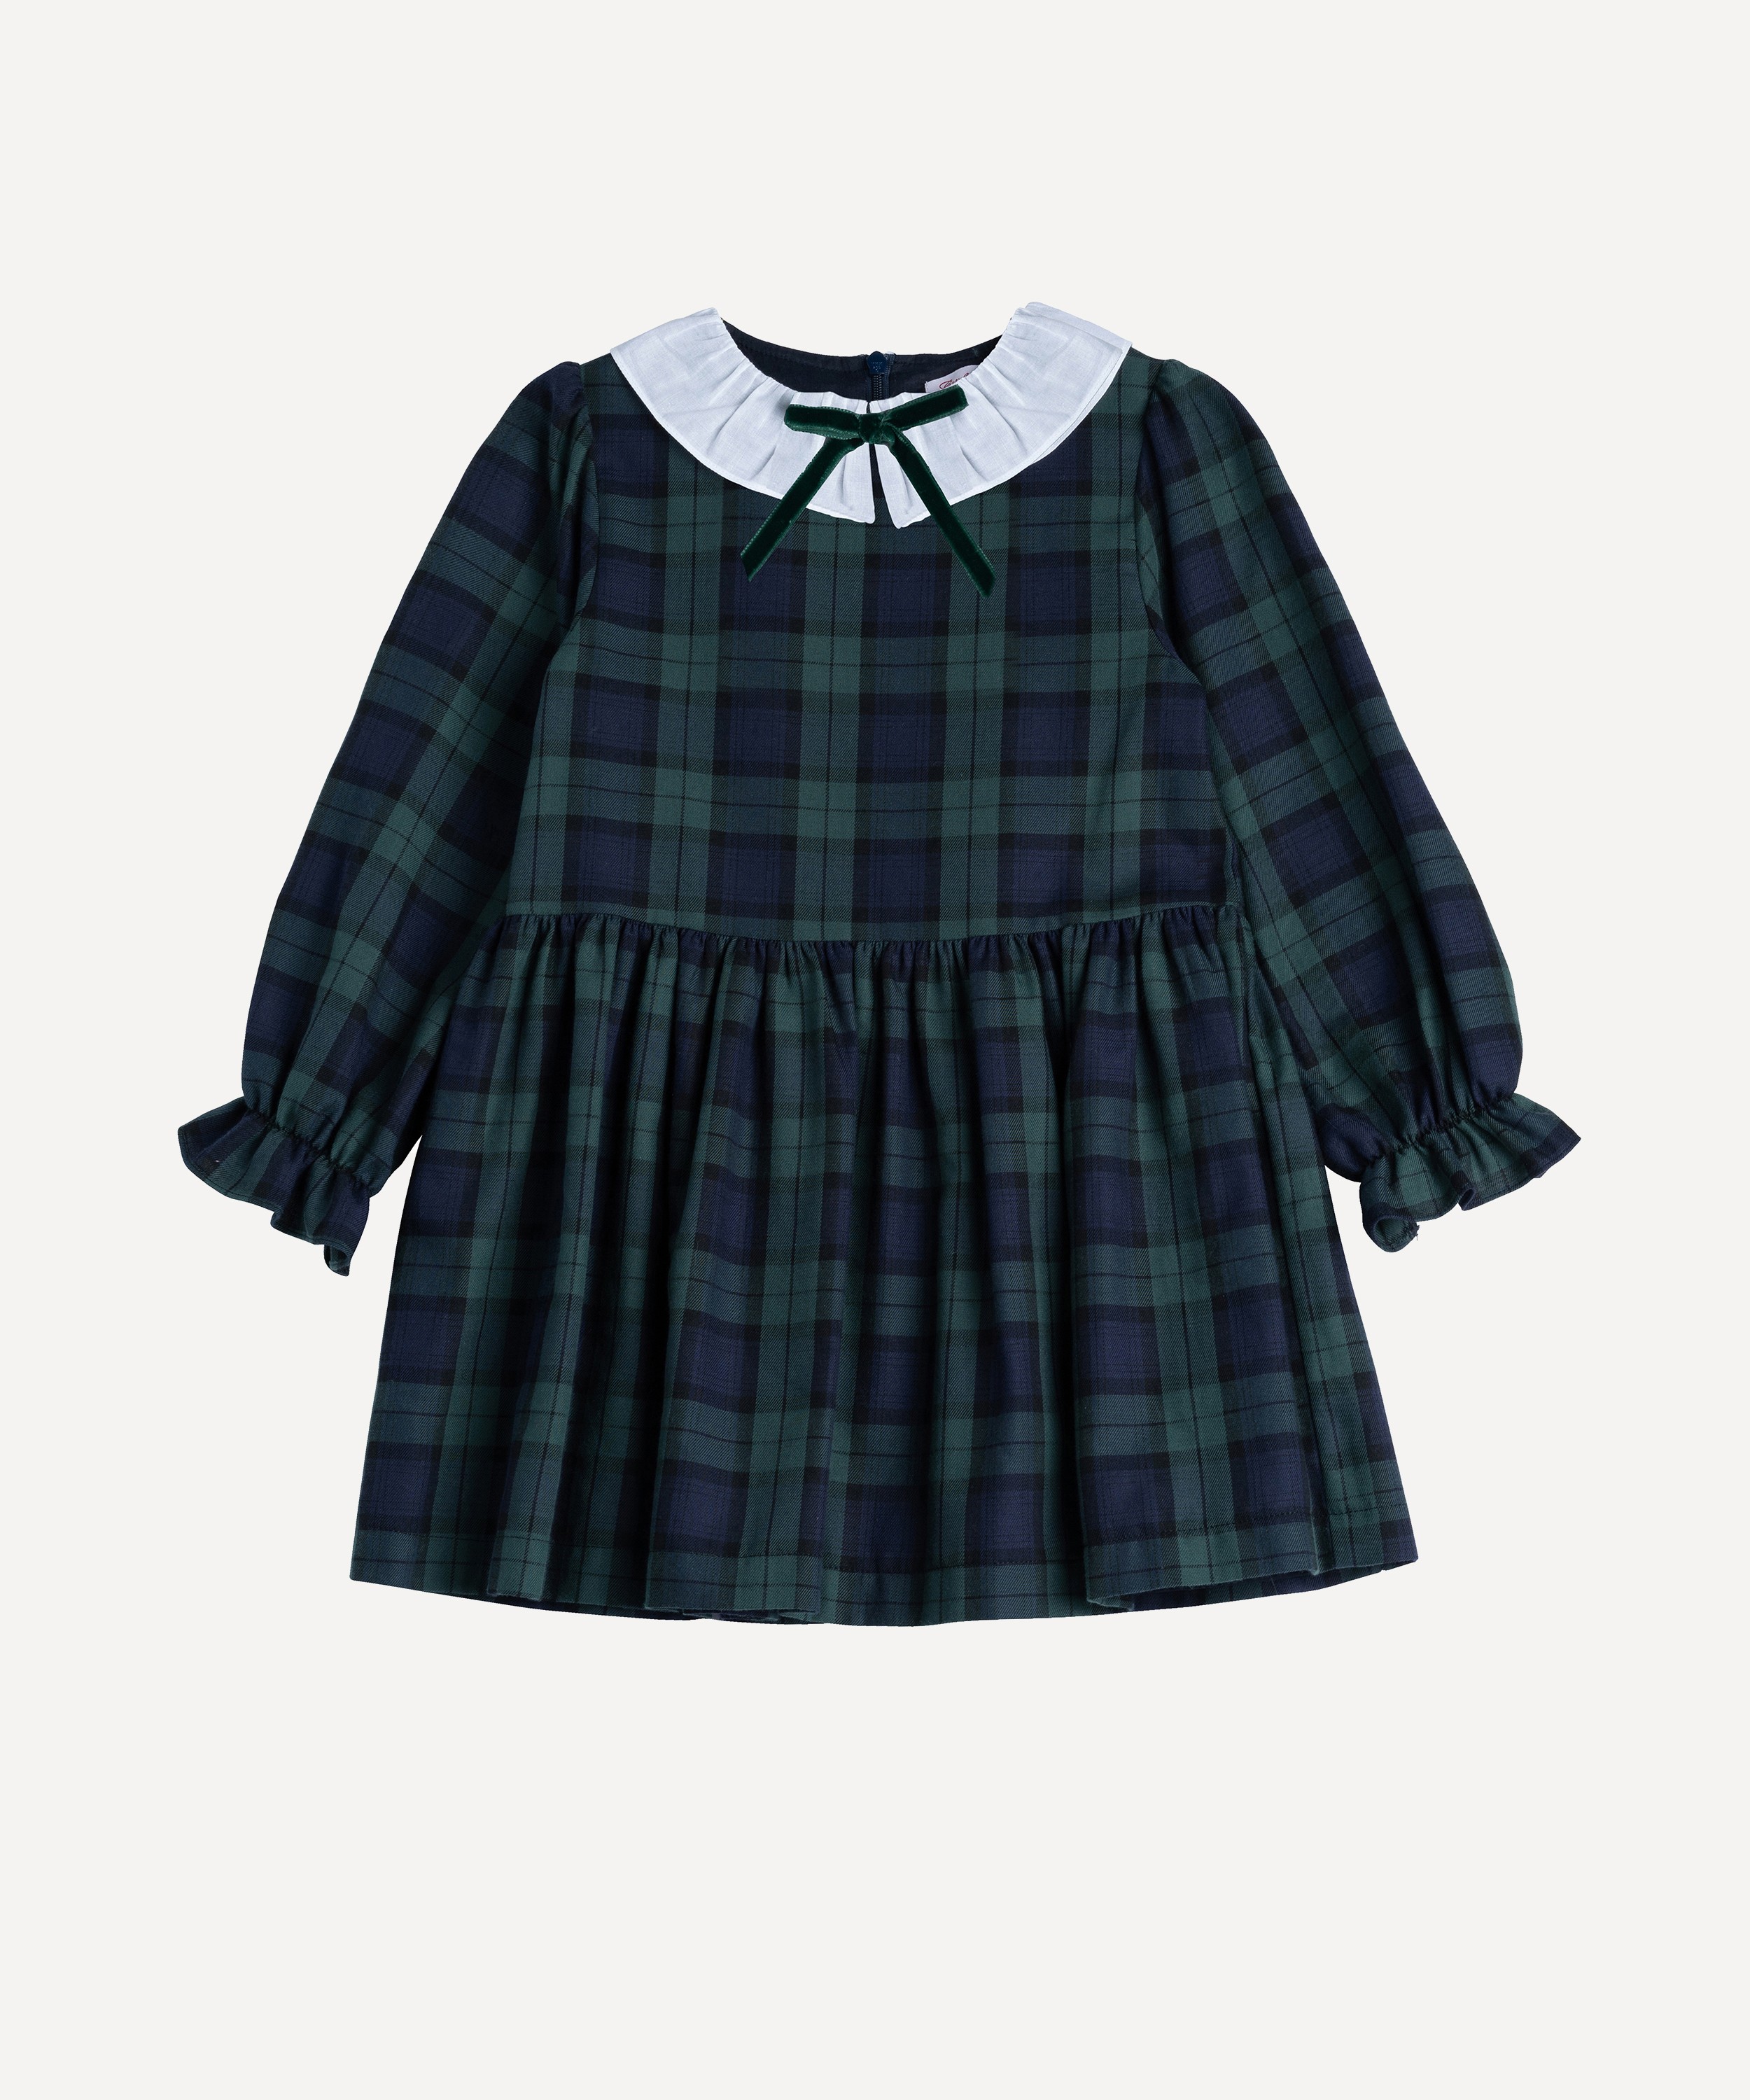 Trotters - Tabitha Willow Tartan Dress 2-5 Years image number 0